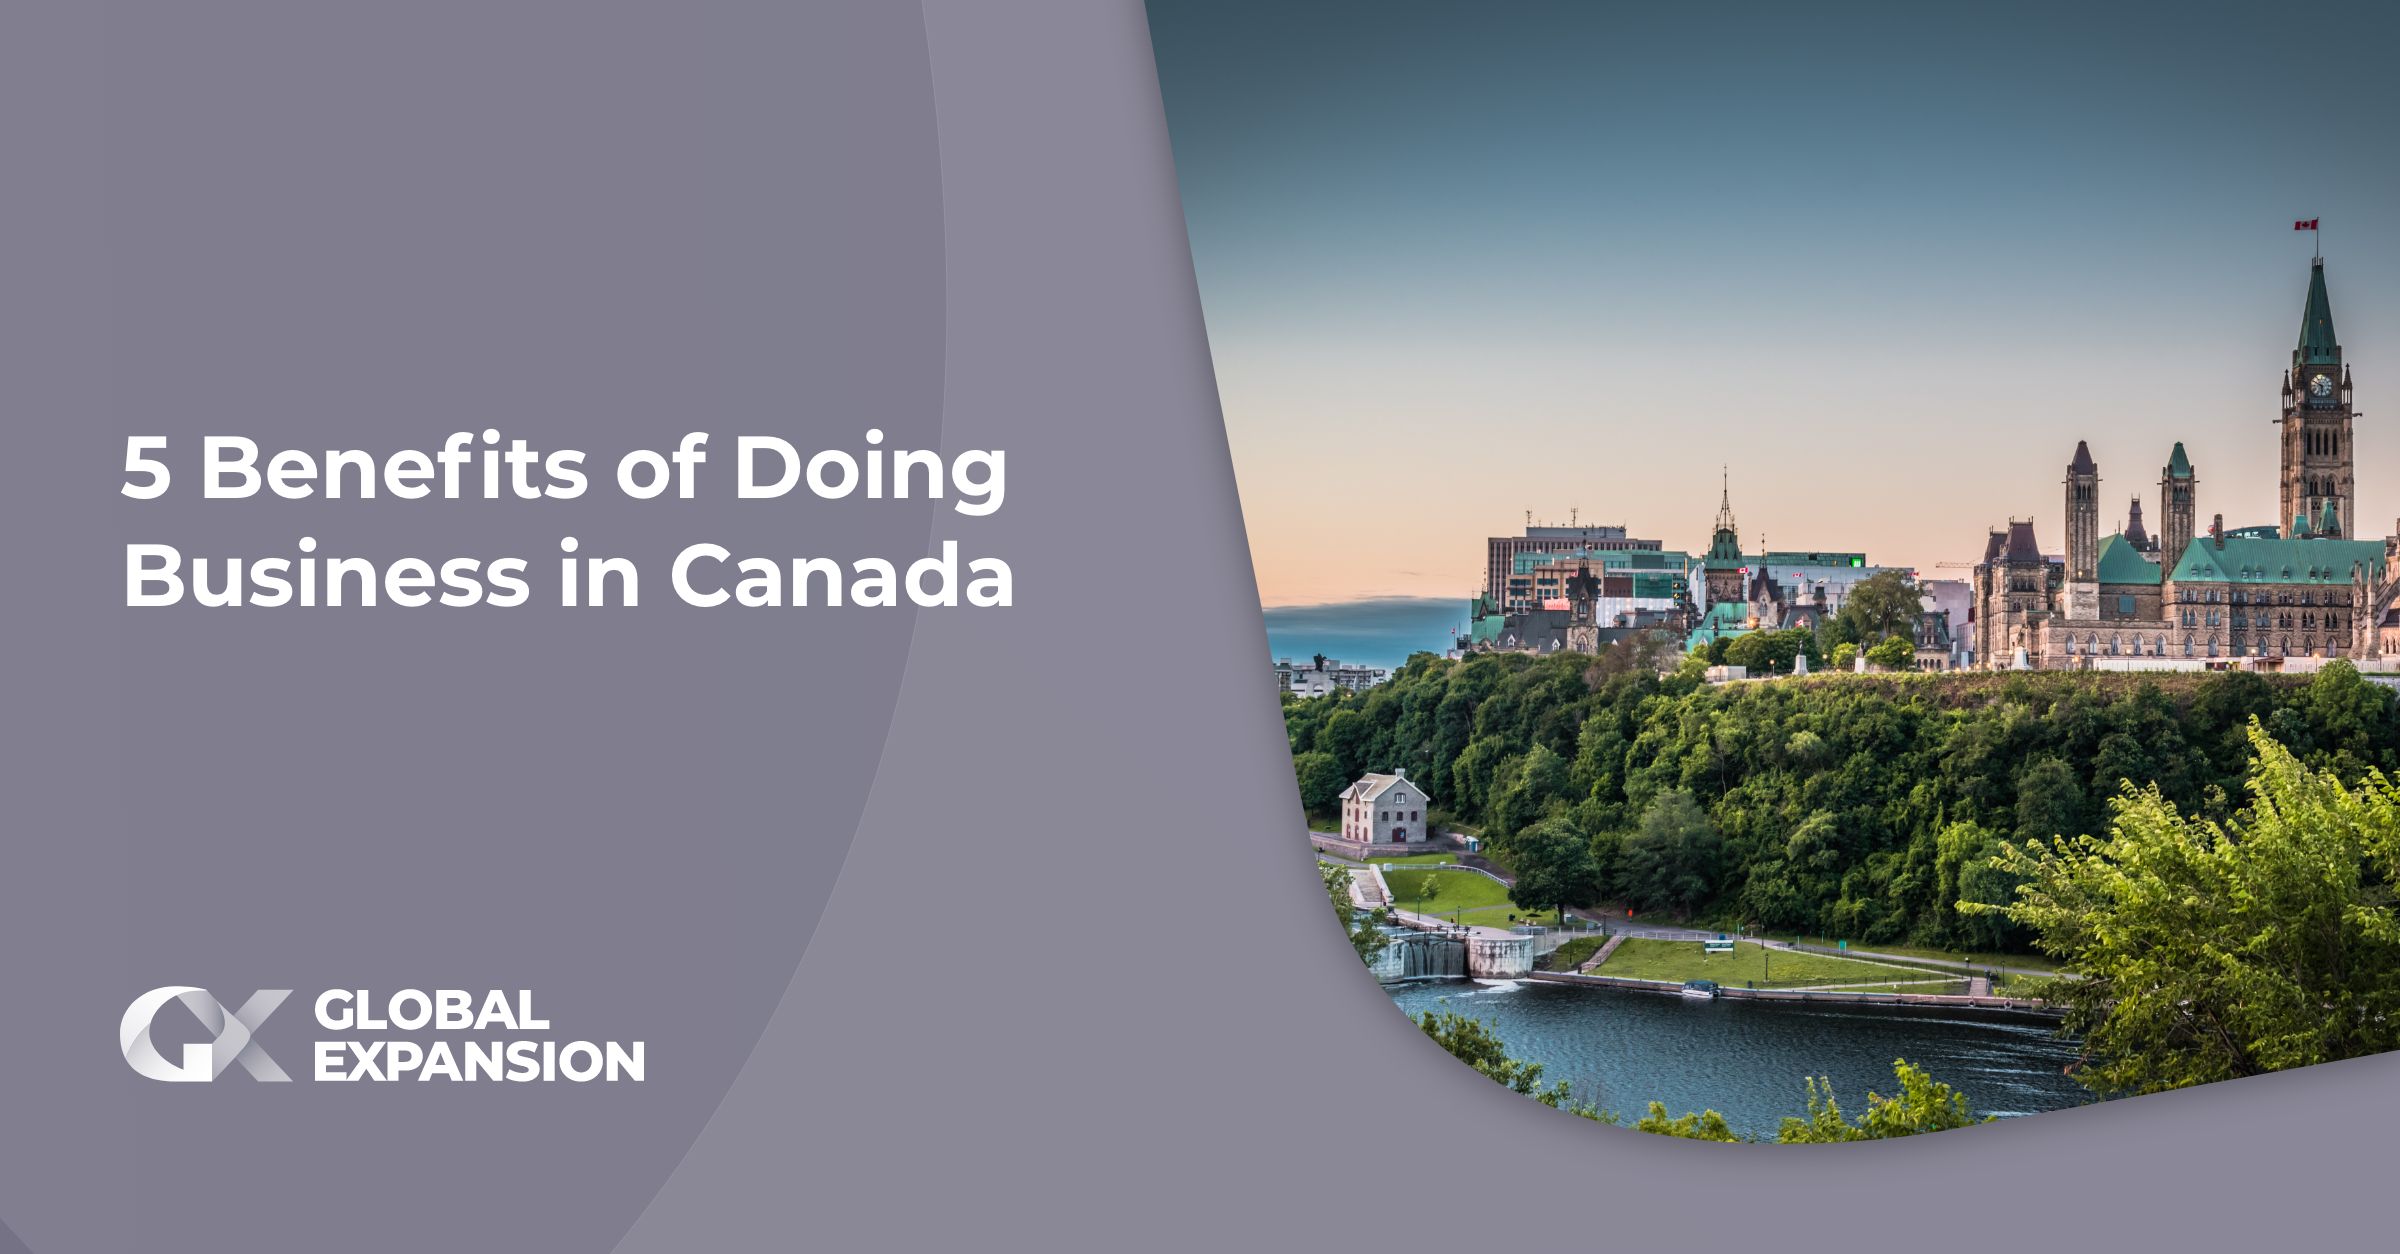 5 Benefits of Doing Business in Canada